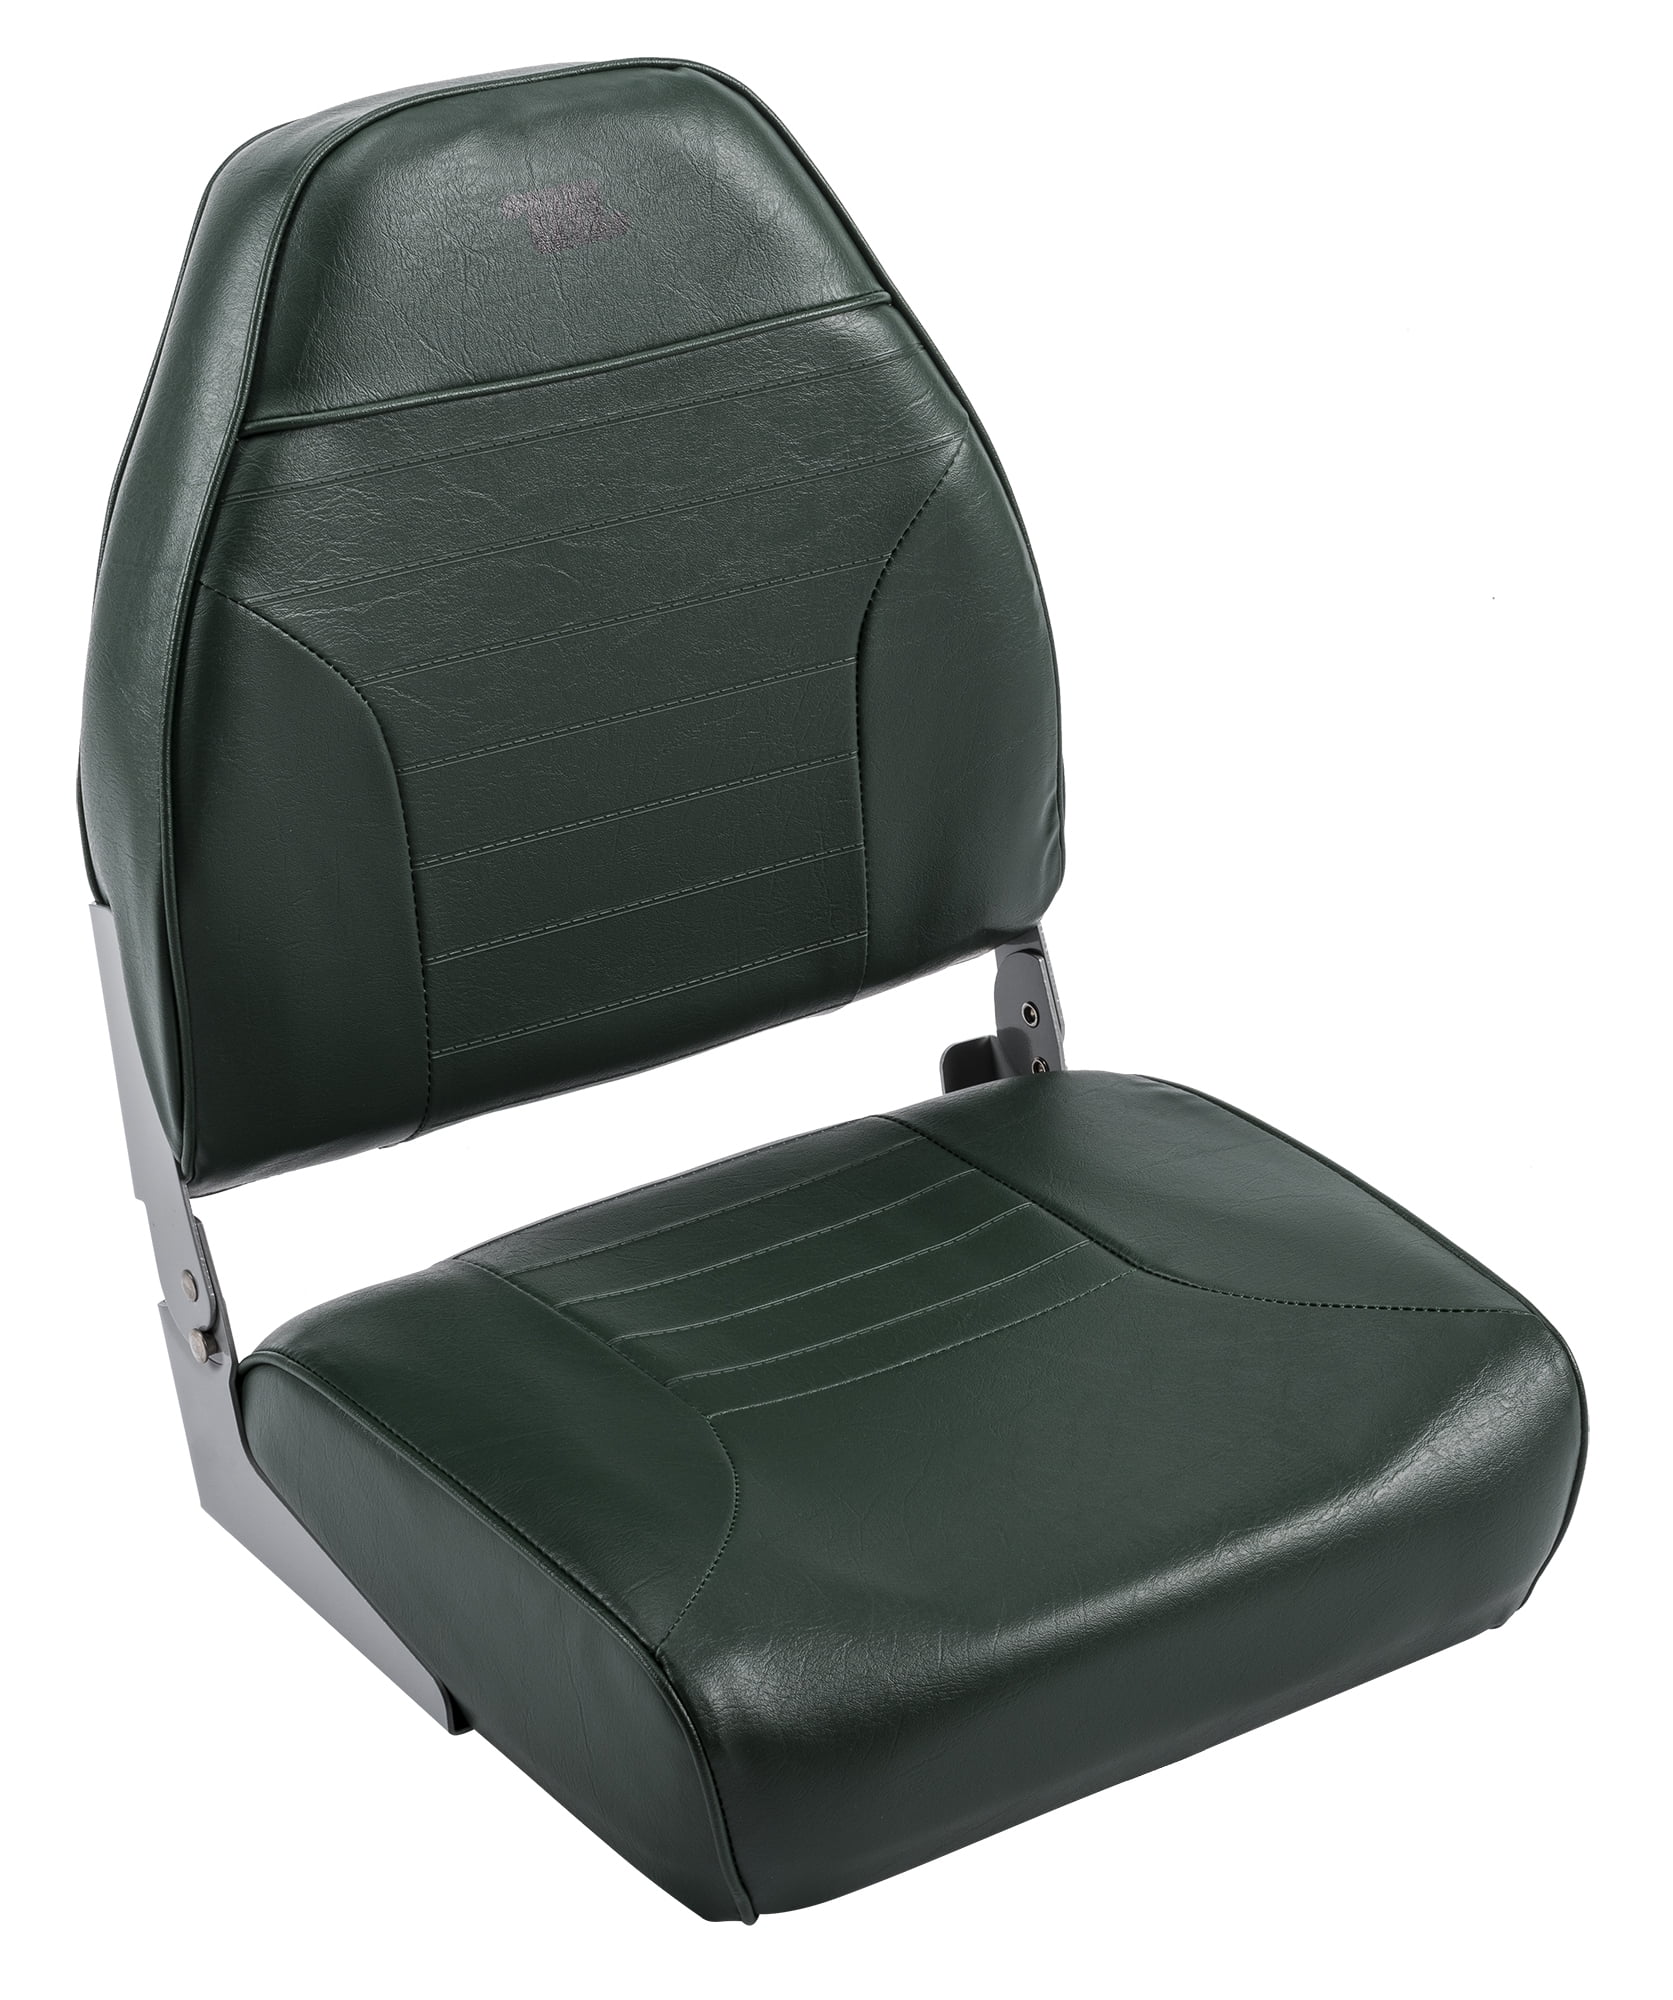 Wise 8WD588PLS-661 Standard High Back Boat Seat, Grey/Red